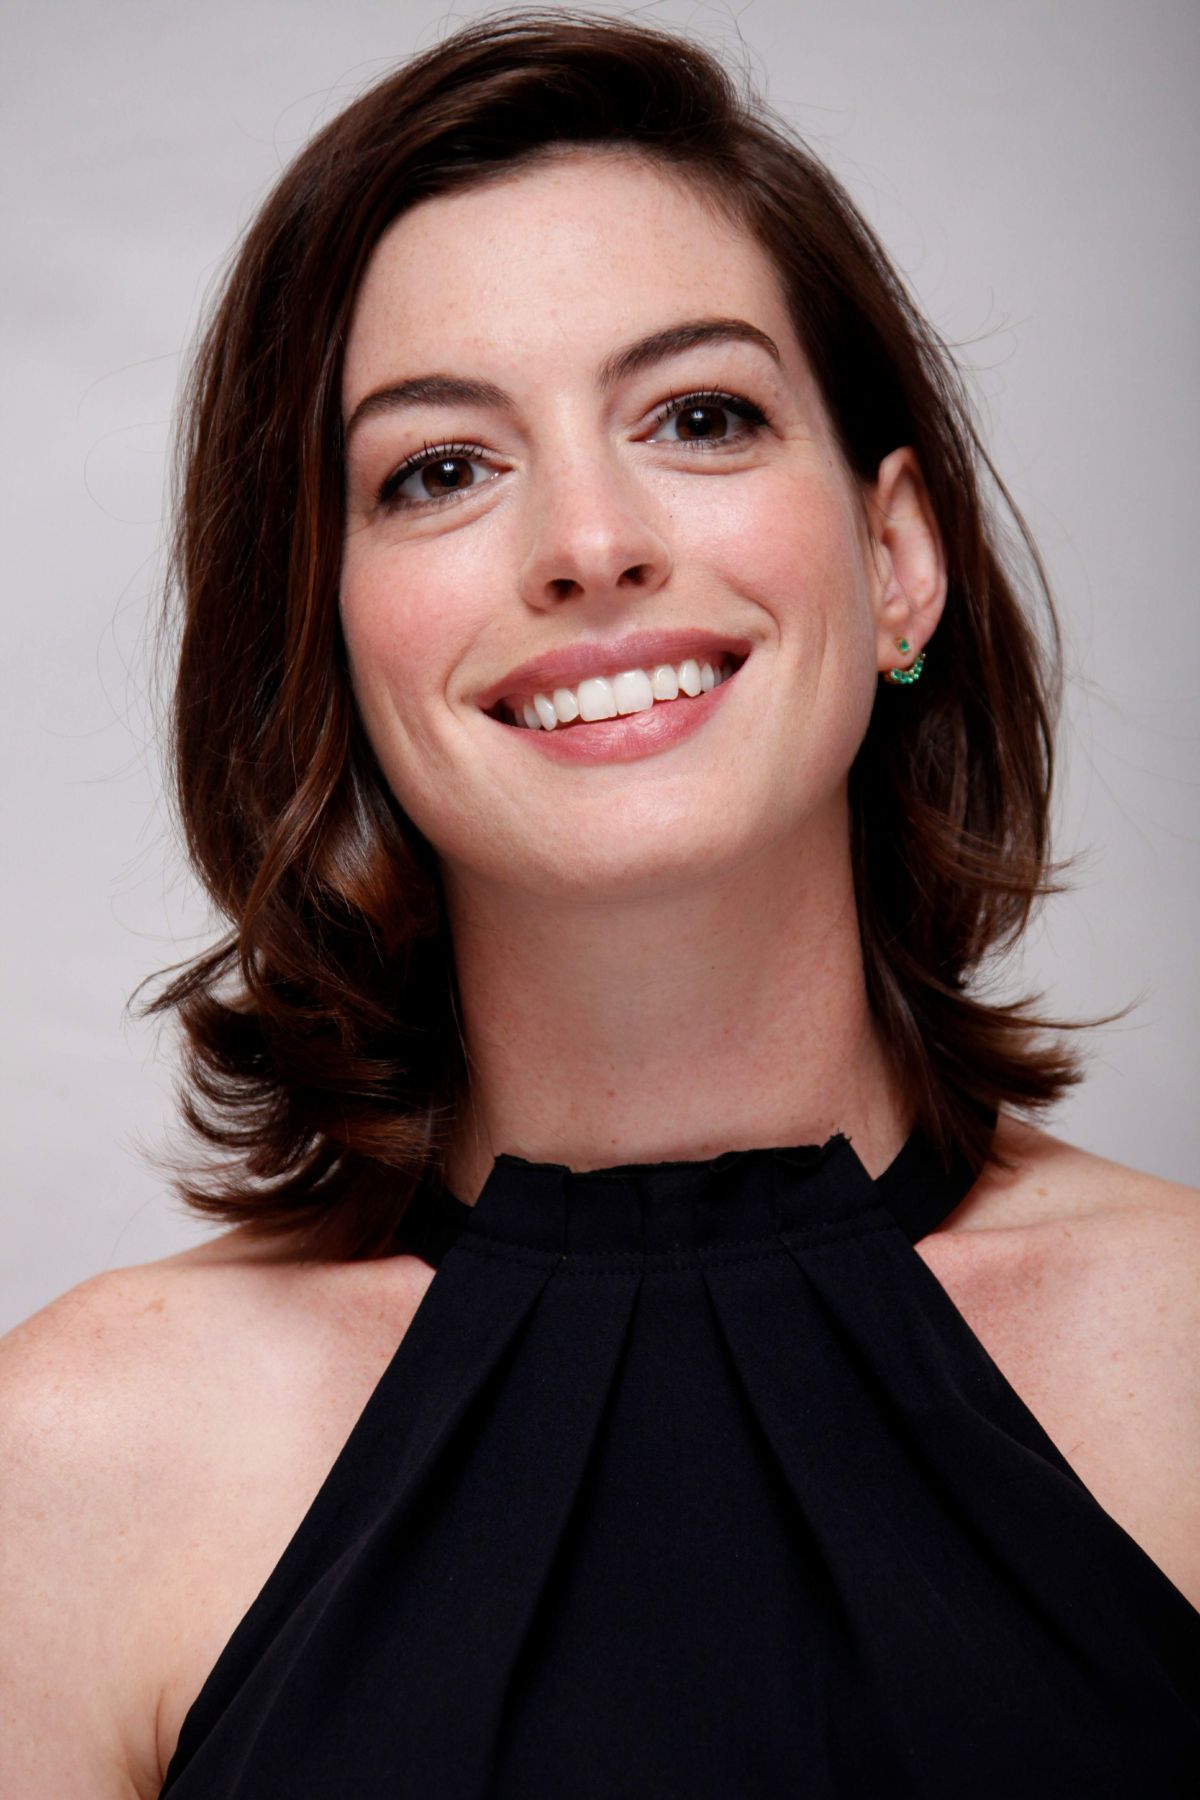 HQ Anne Hathaway Wallpapers | File 178.51Kb